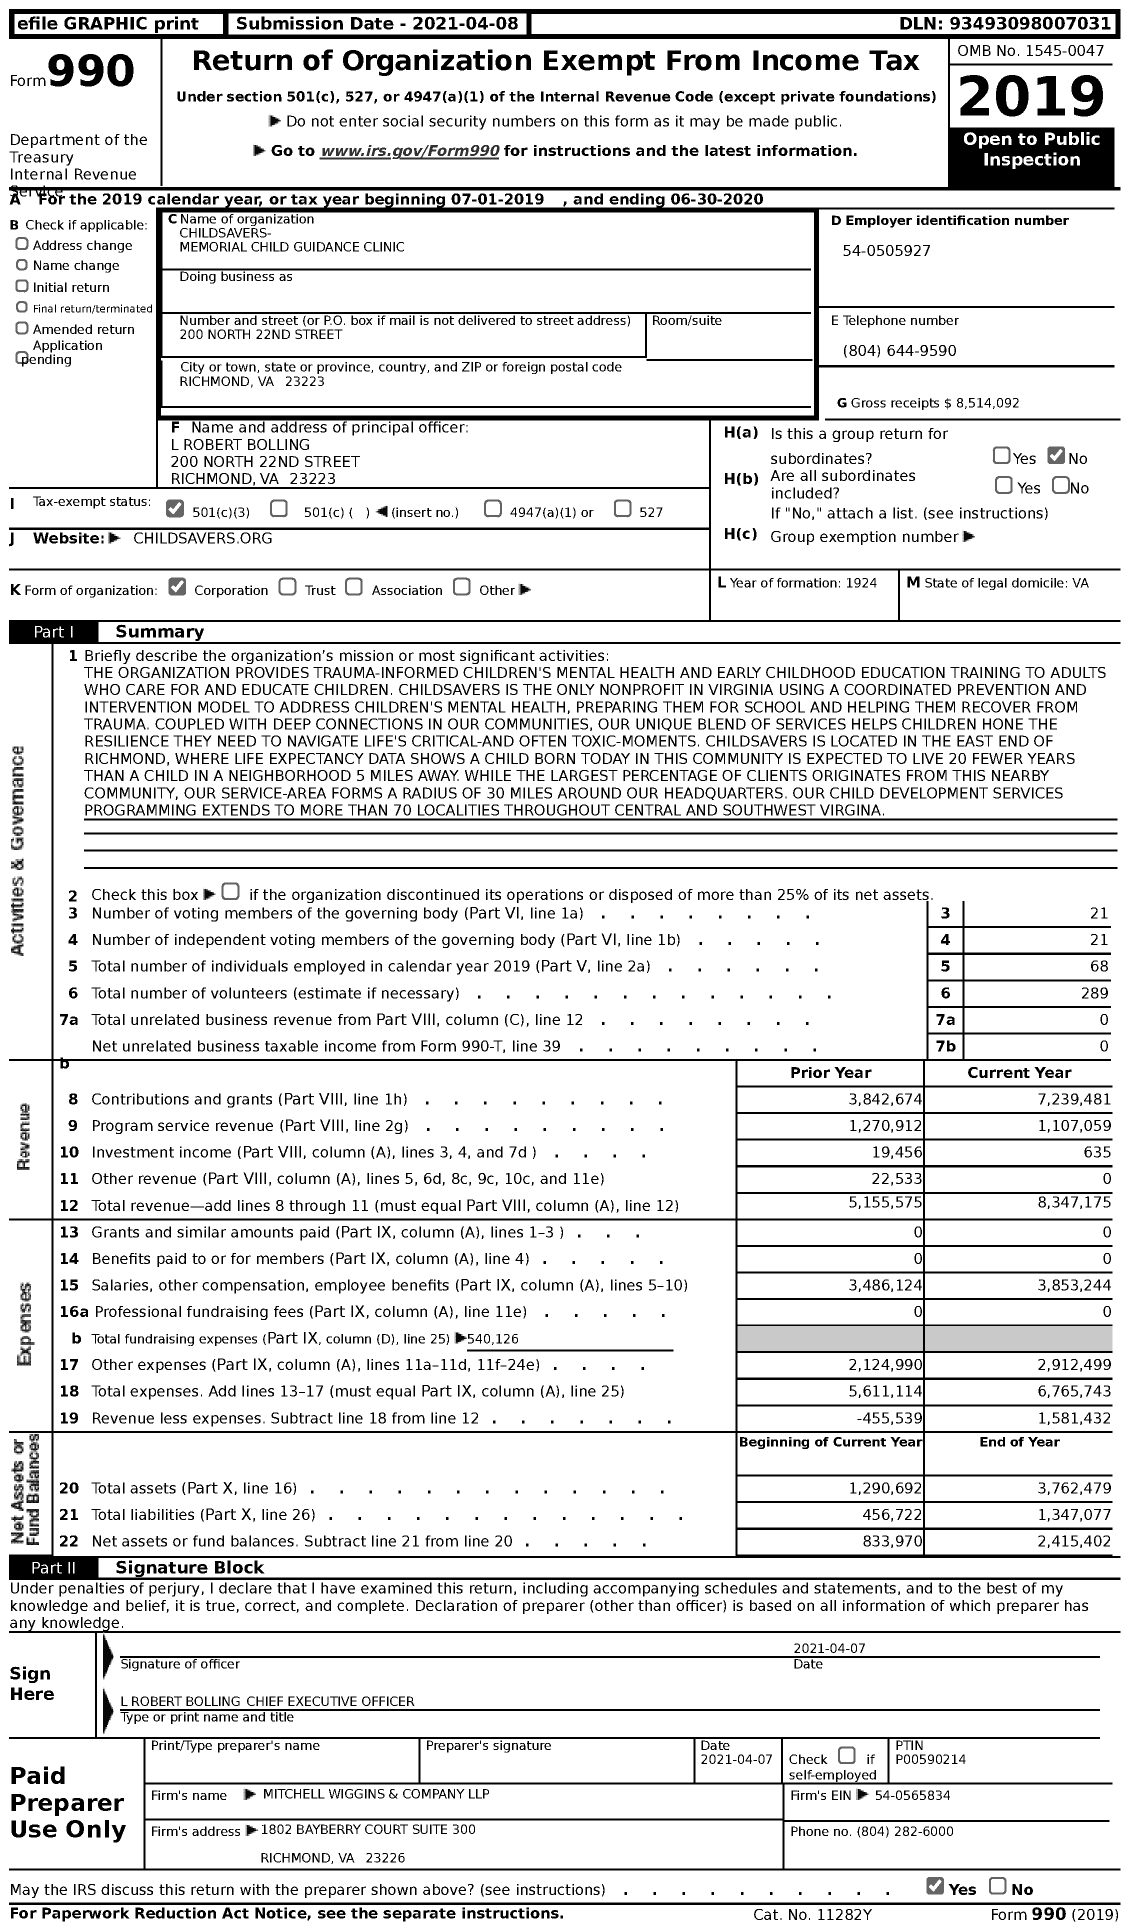 Image of first page of 2019 Form 990 for Childsavers- Memorial Child Guidance Clinic